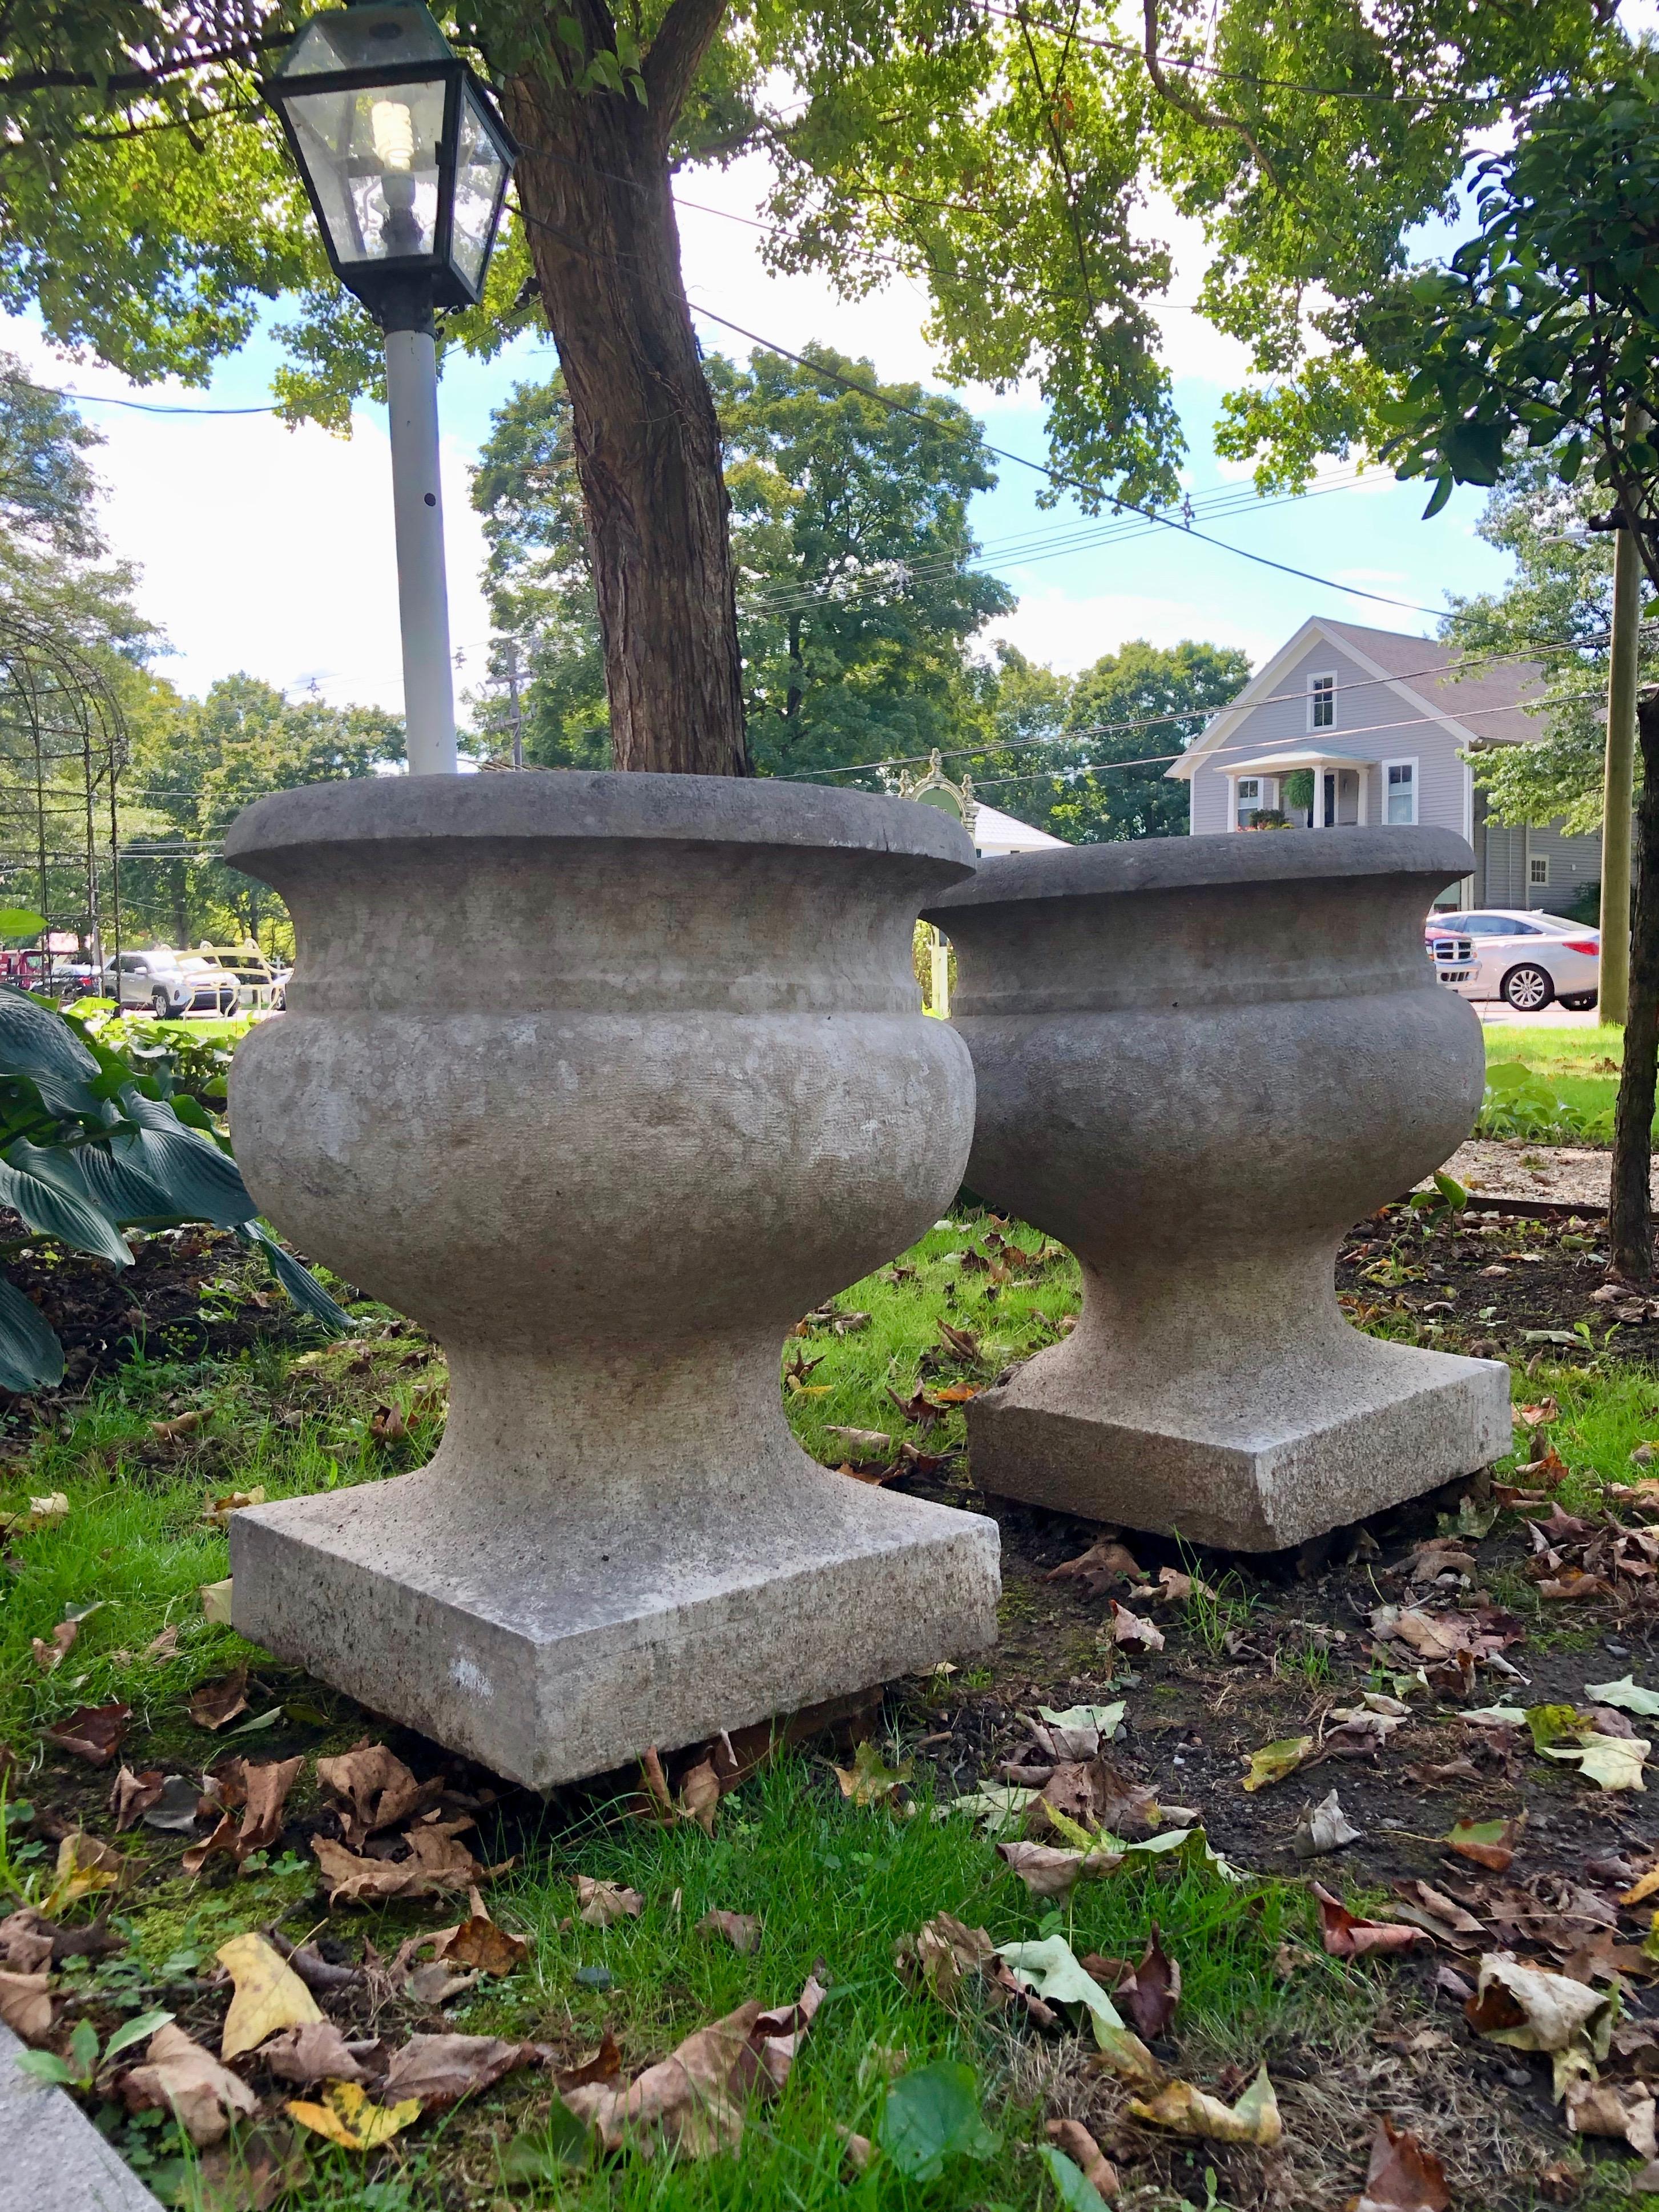 This is a fabulous pair of urns, dating to circa 1800 and each is hand carved from a single piece of stone from Pierre de Bourgogne (Burgundy Stone). The stone is extremely hard, making it suitable for all climates and can be left outside year-round